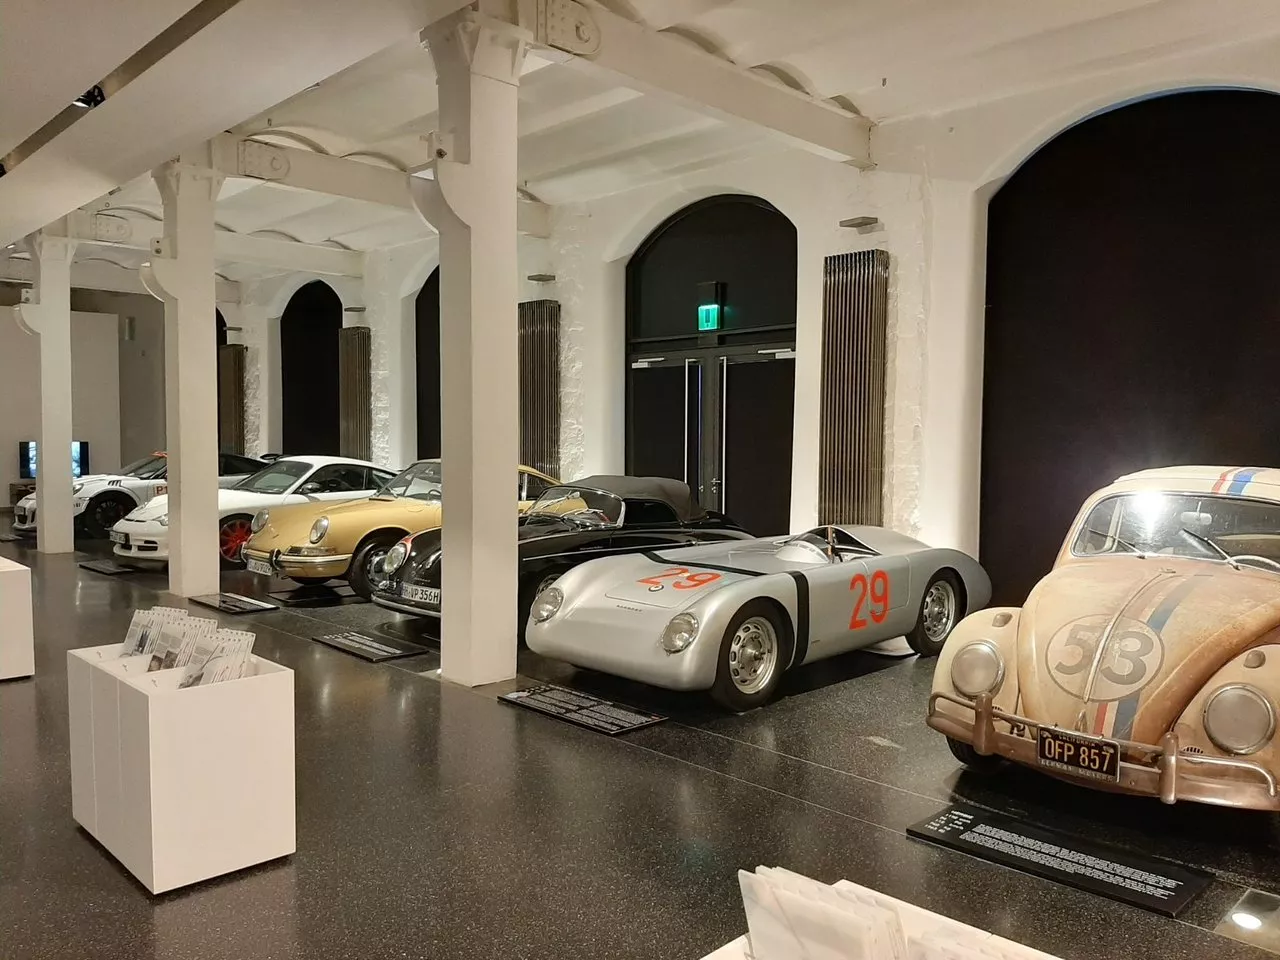 Car Prototype Museum in Germany, Europe | Museums - Rated 3.5